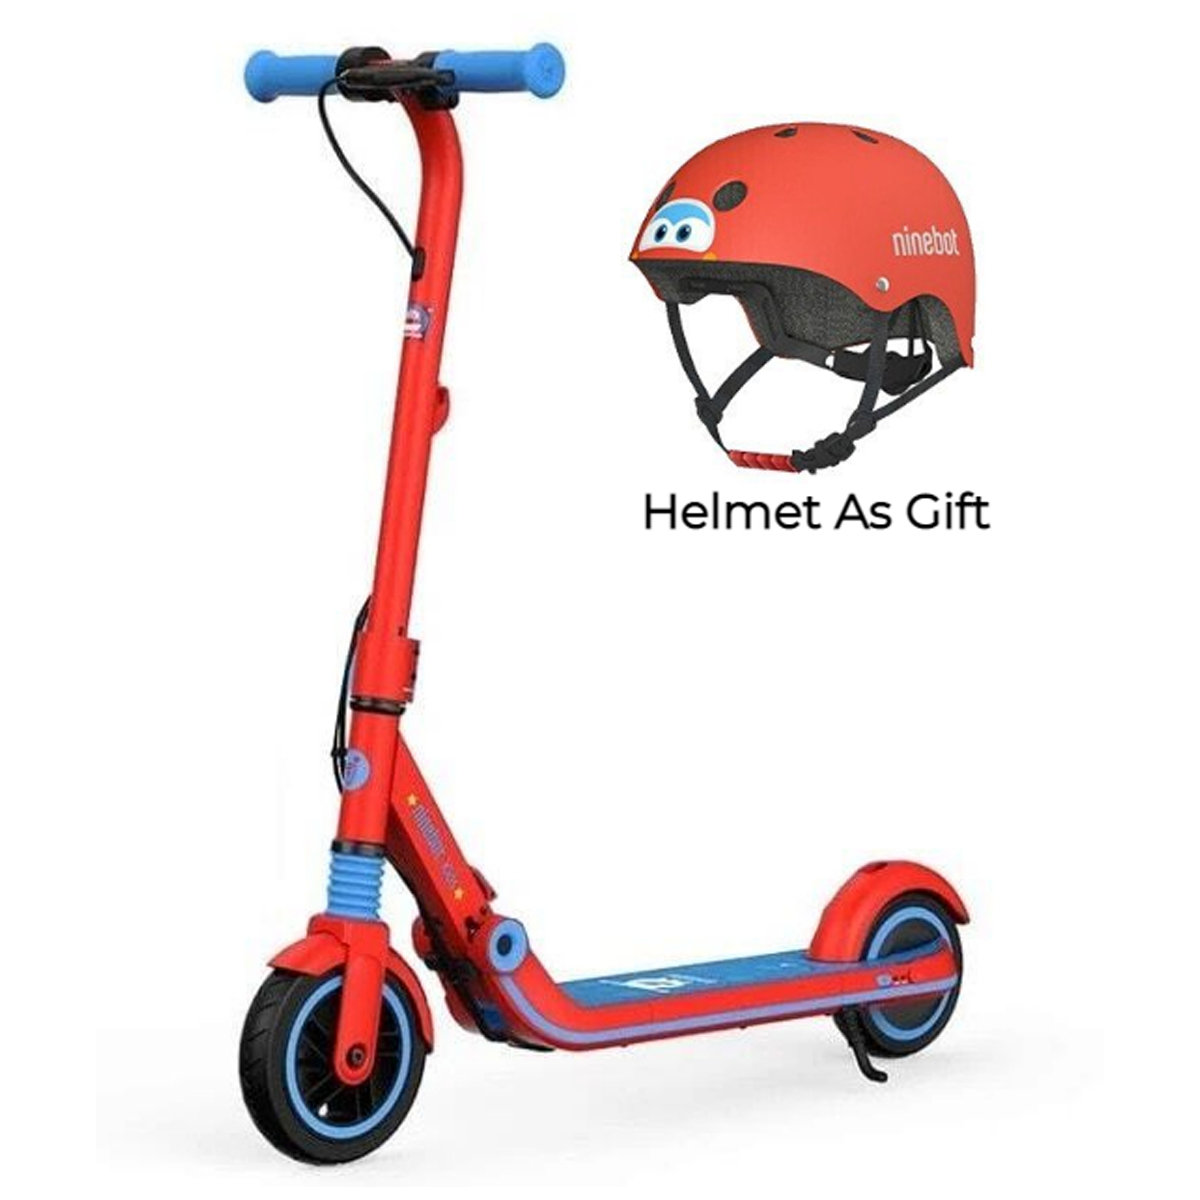 NINEBOT E8 Kids Scooter SUPER WINGS EDITION with HELMET